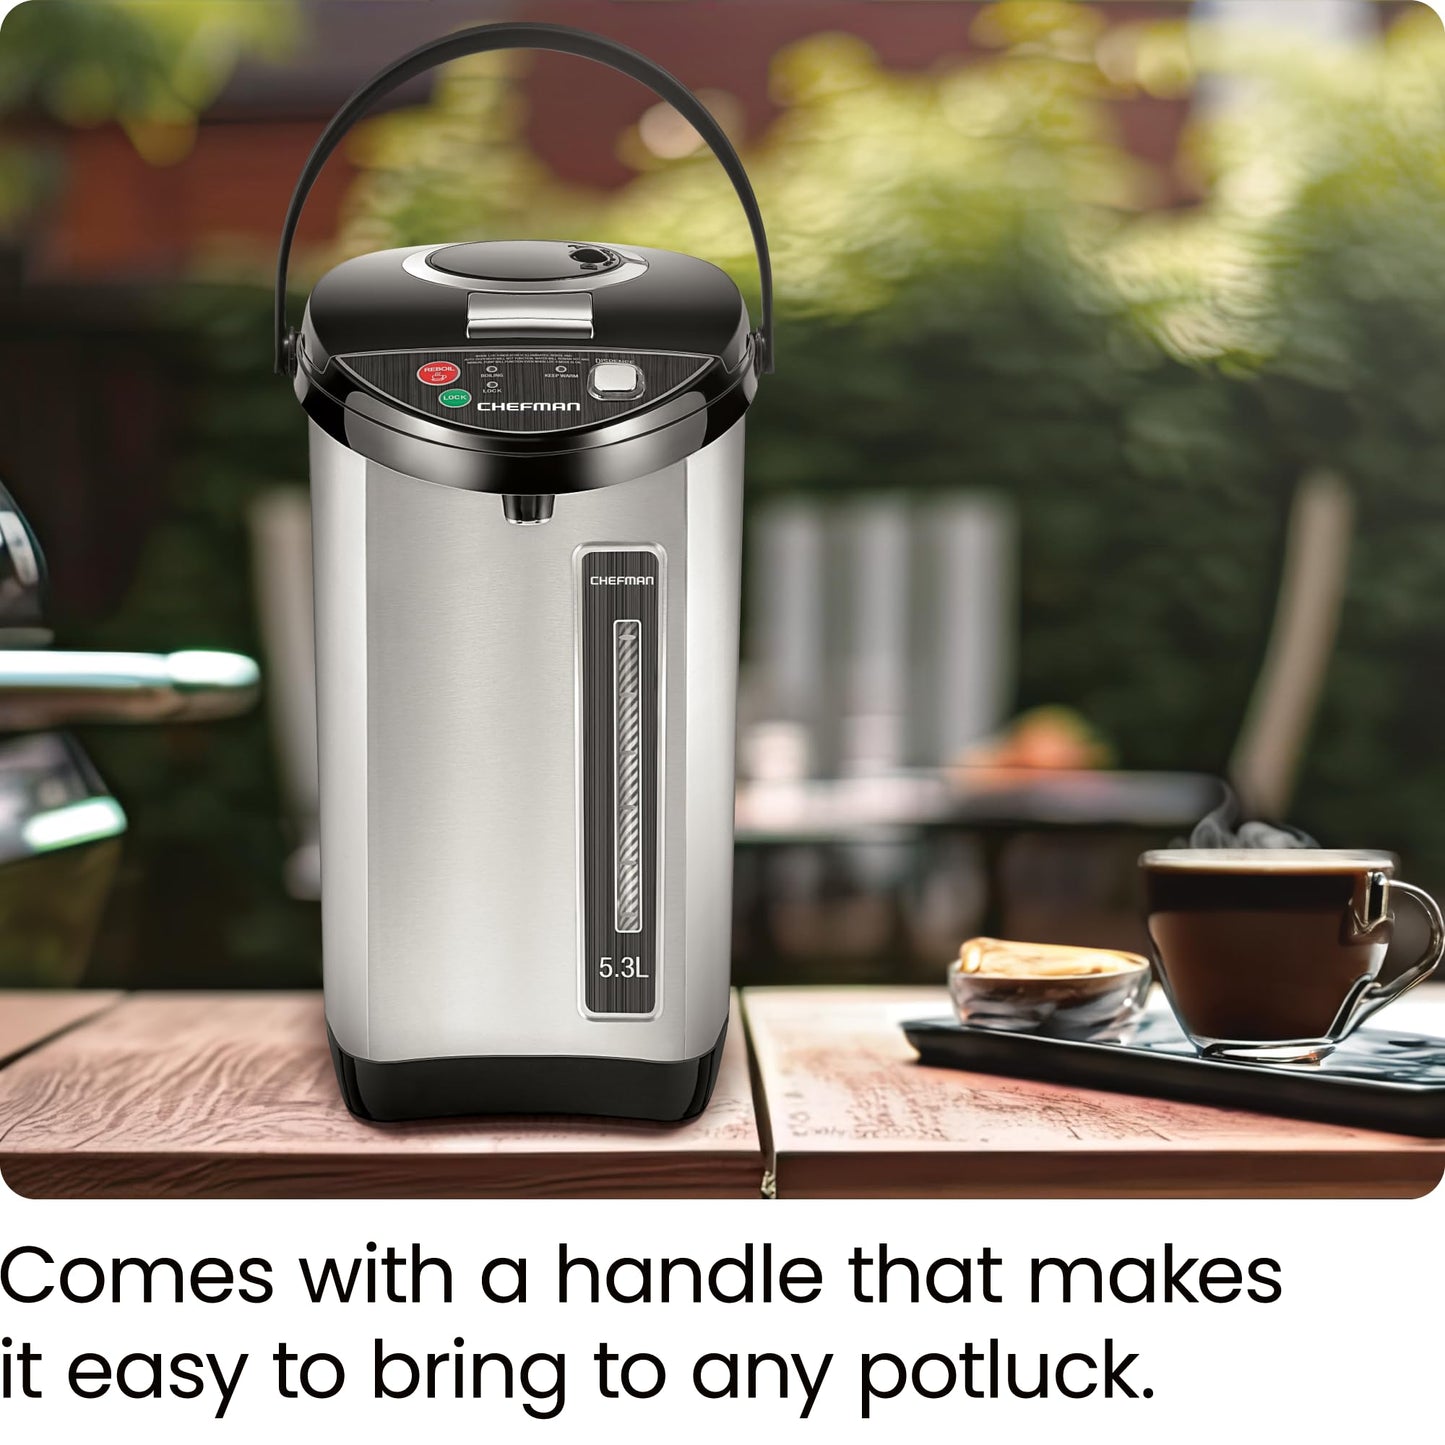 Chefman Electric Hot Water Pot Urn w/ Manual Dispense Buttons, Safety Lock, Instant Heating for Coffee & Tea, Auto-Shutoff/Boil Dry Protection, Insulated Stainless Steel, 5.3L/5.6 Qt/30+ Cups - Like New